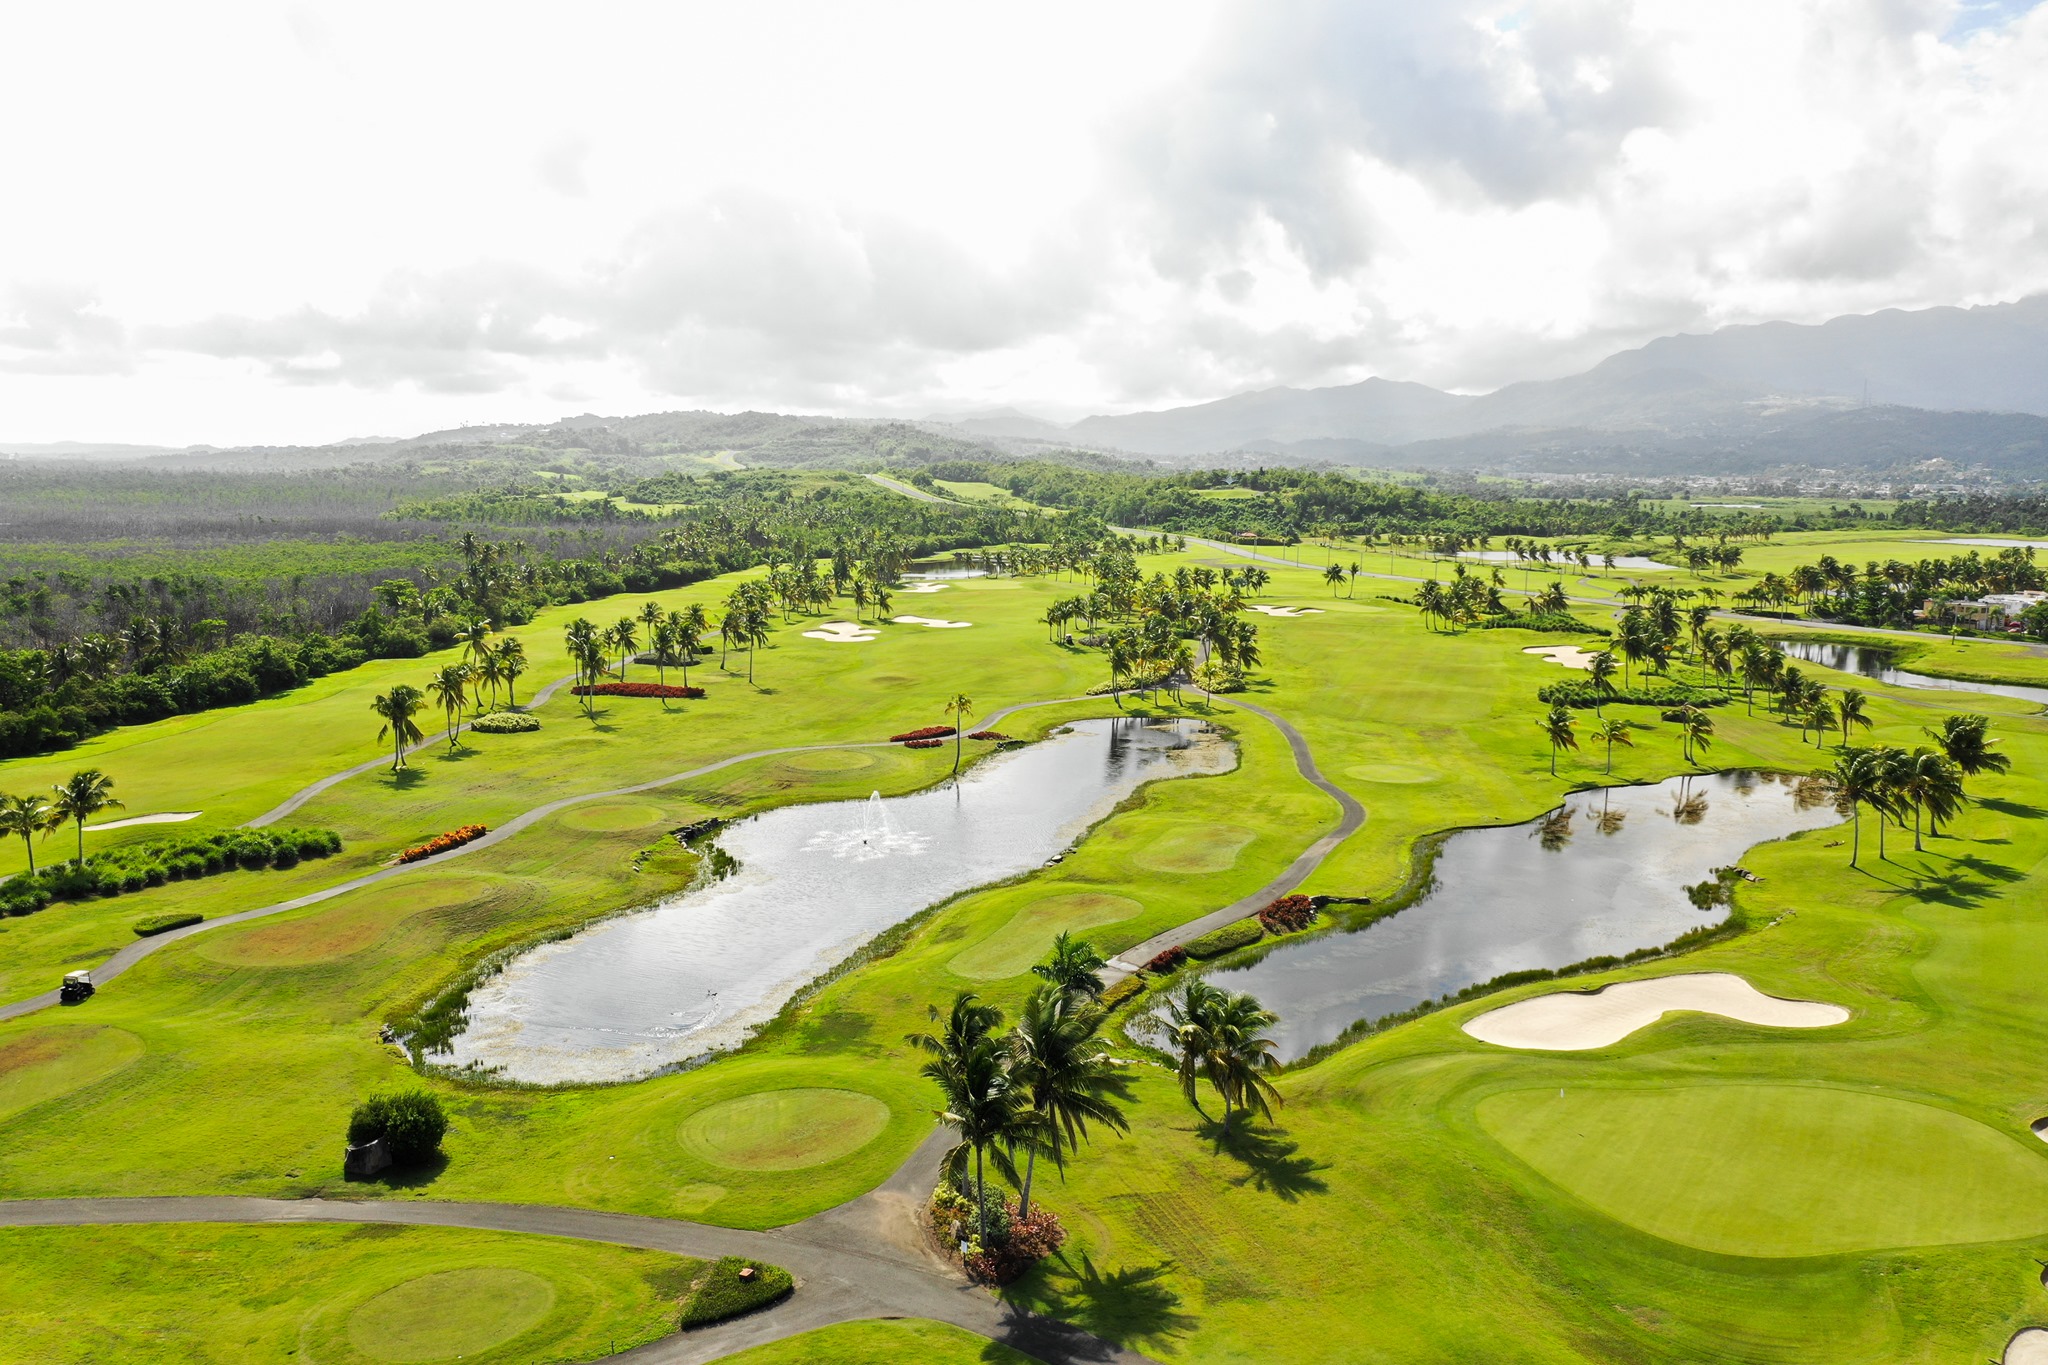 <p>The Grand Reserve, one of the Caribbean’s only two championship courses, offers a stunning 18-hole layout along the beachfront peninsula with the El Yunque rainforest backdrop.</p>